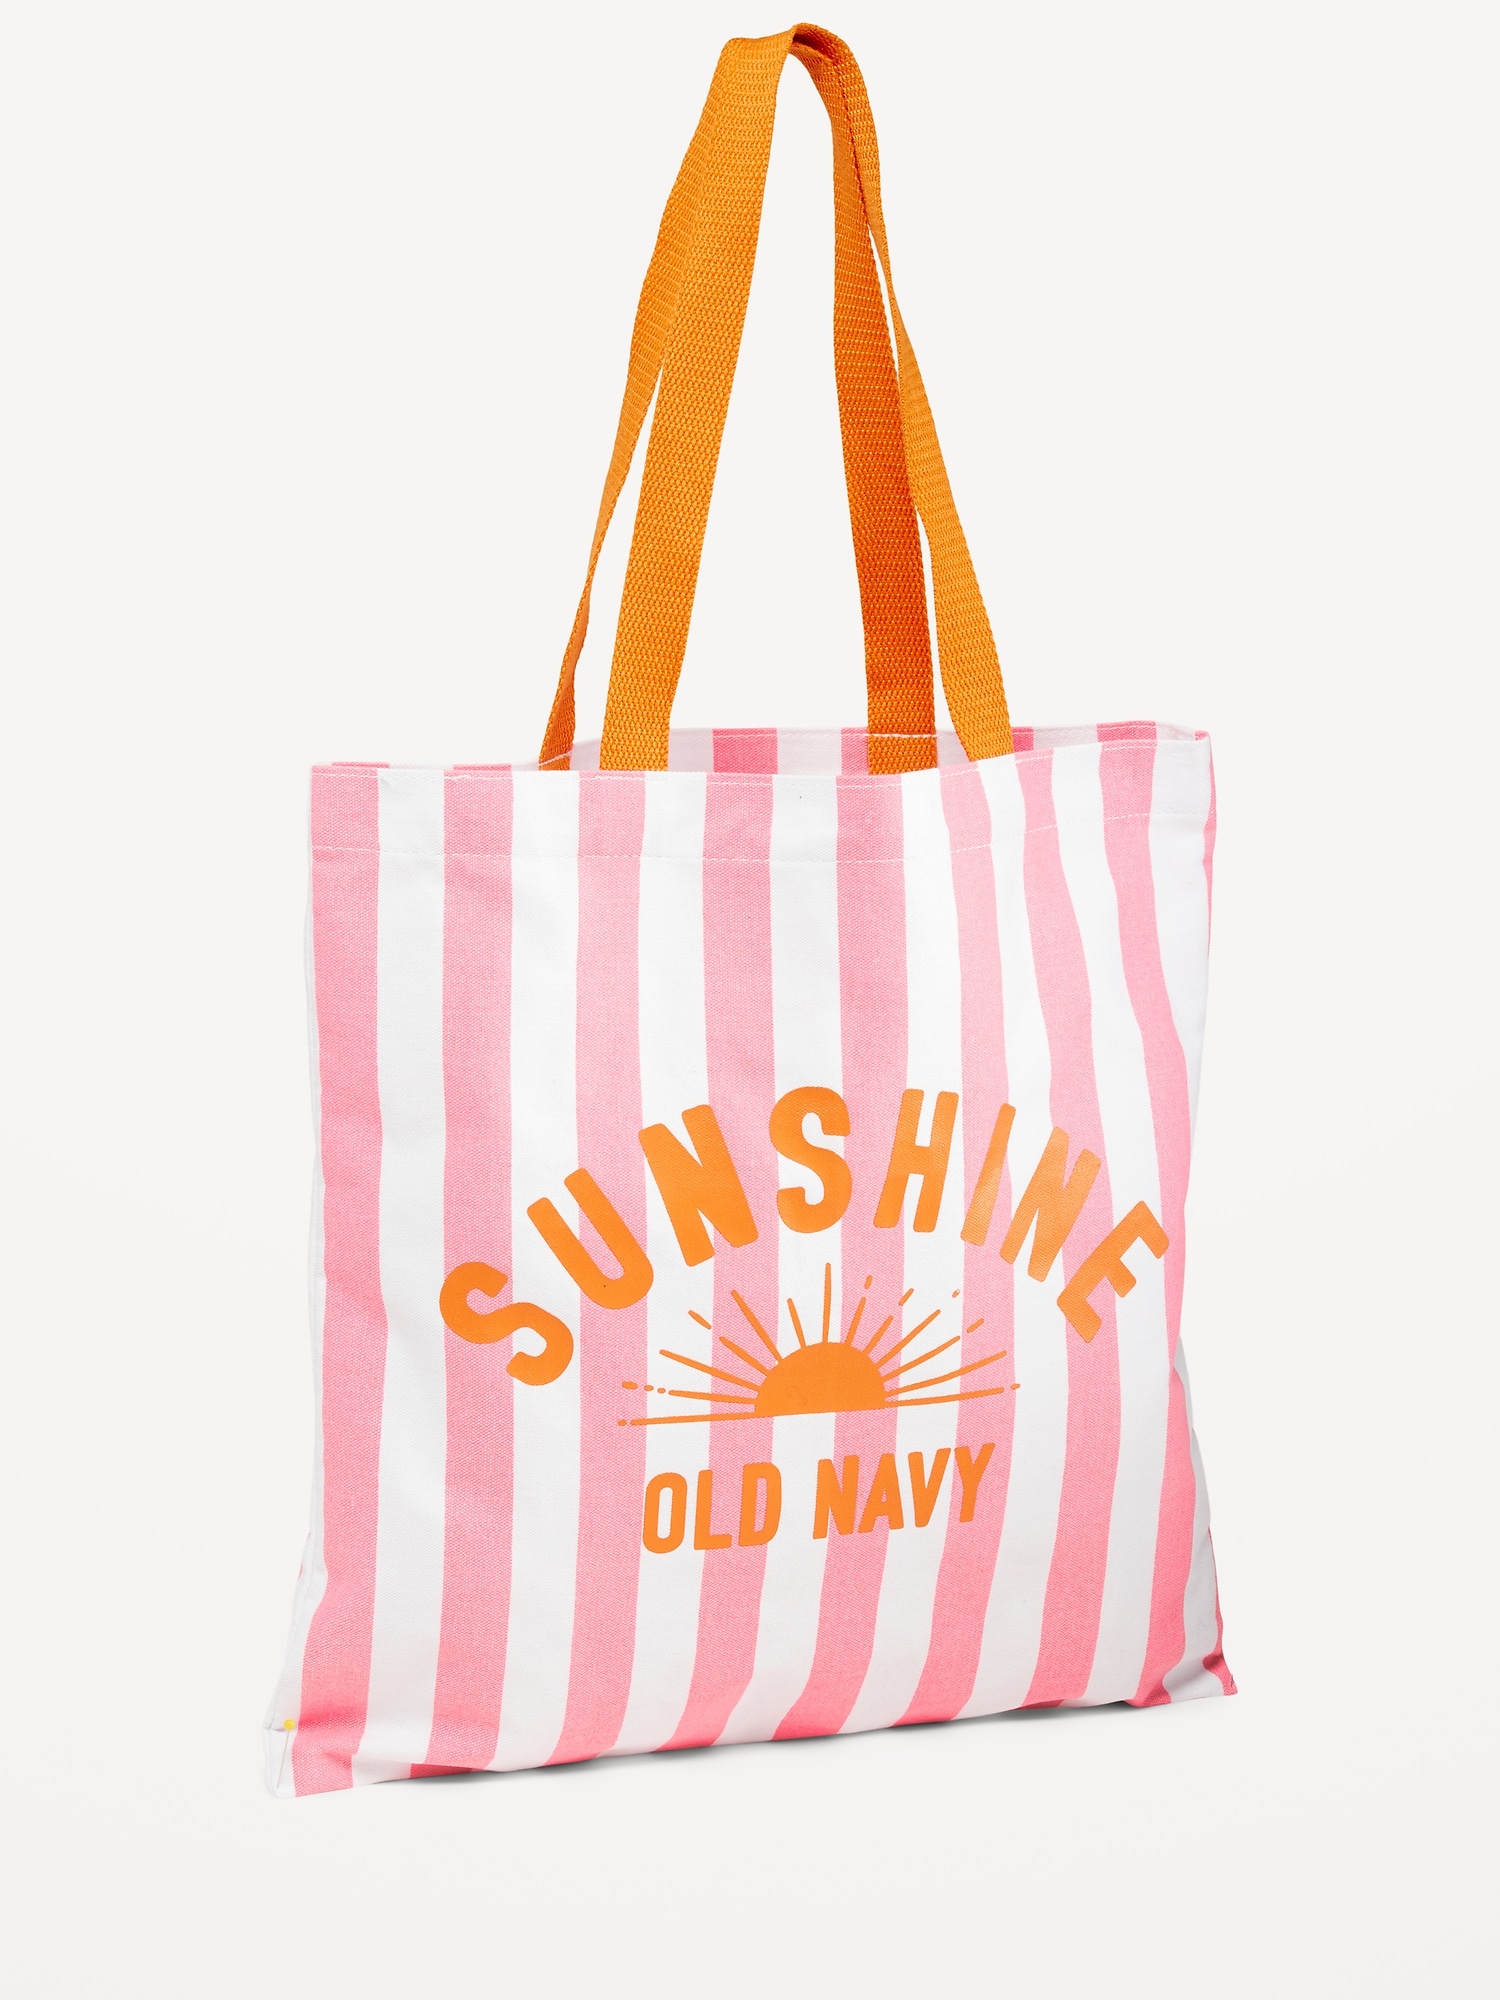 Old Navy Printed Canvas Tote Bag for Women pink. 1